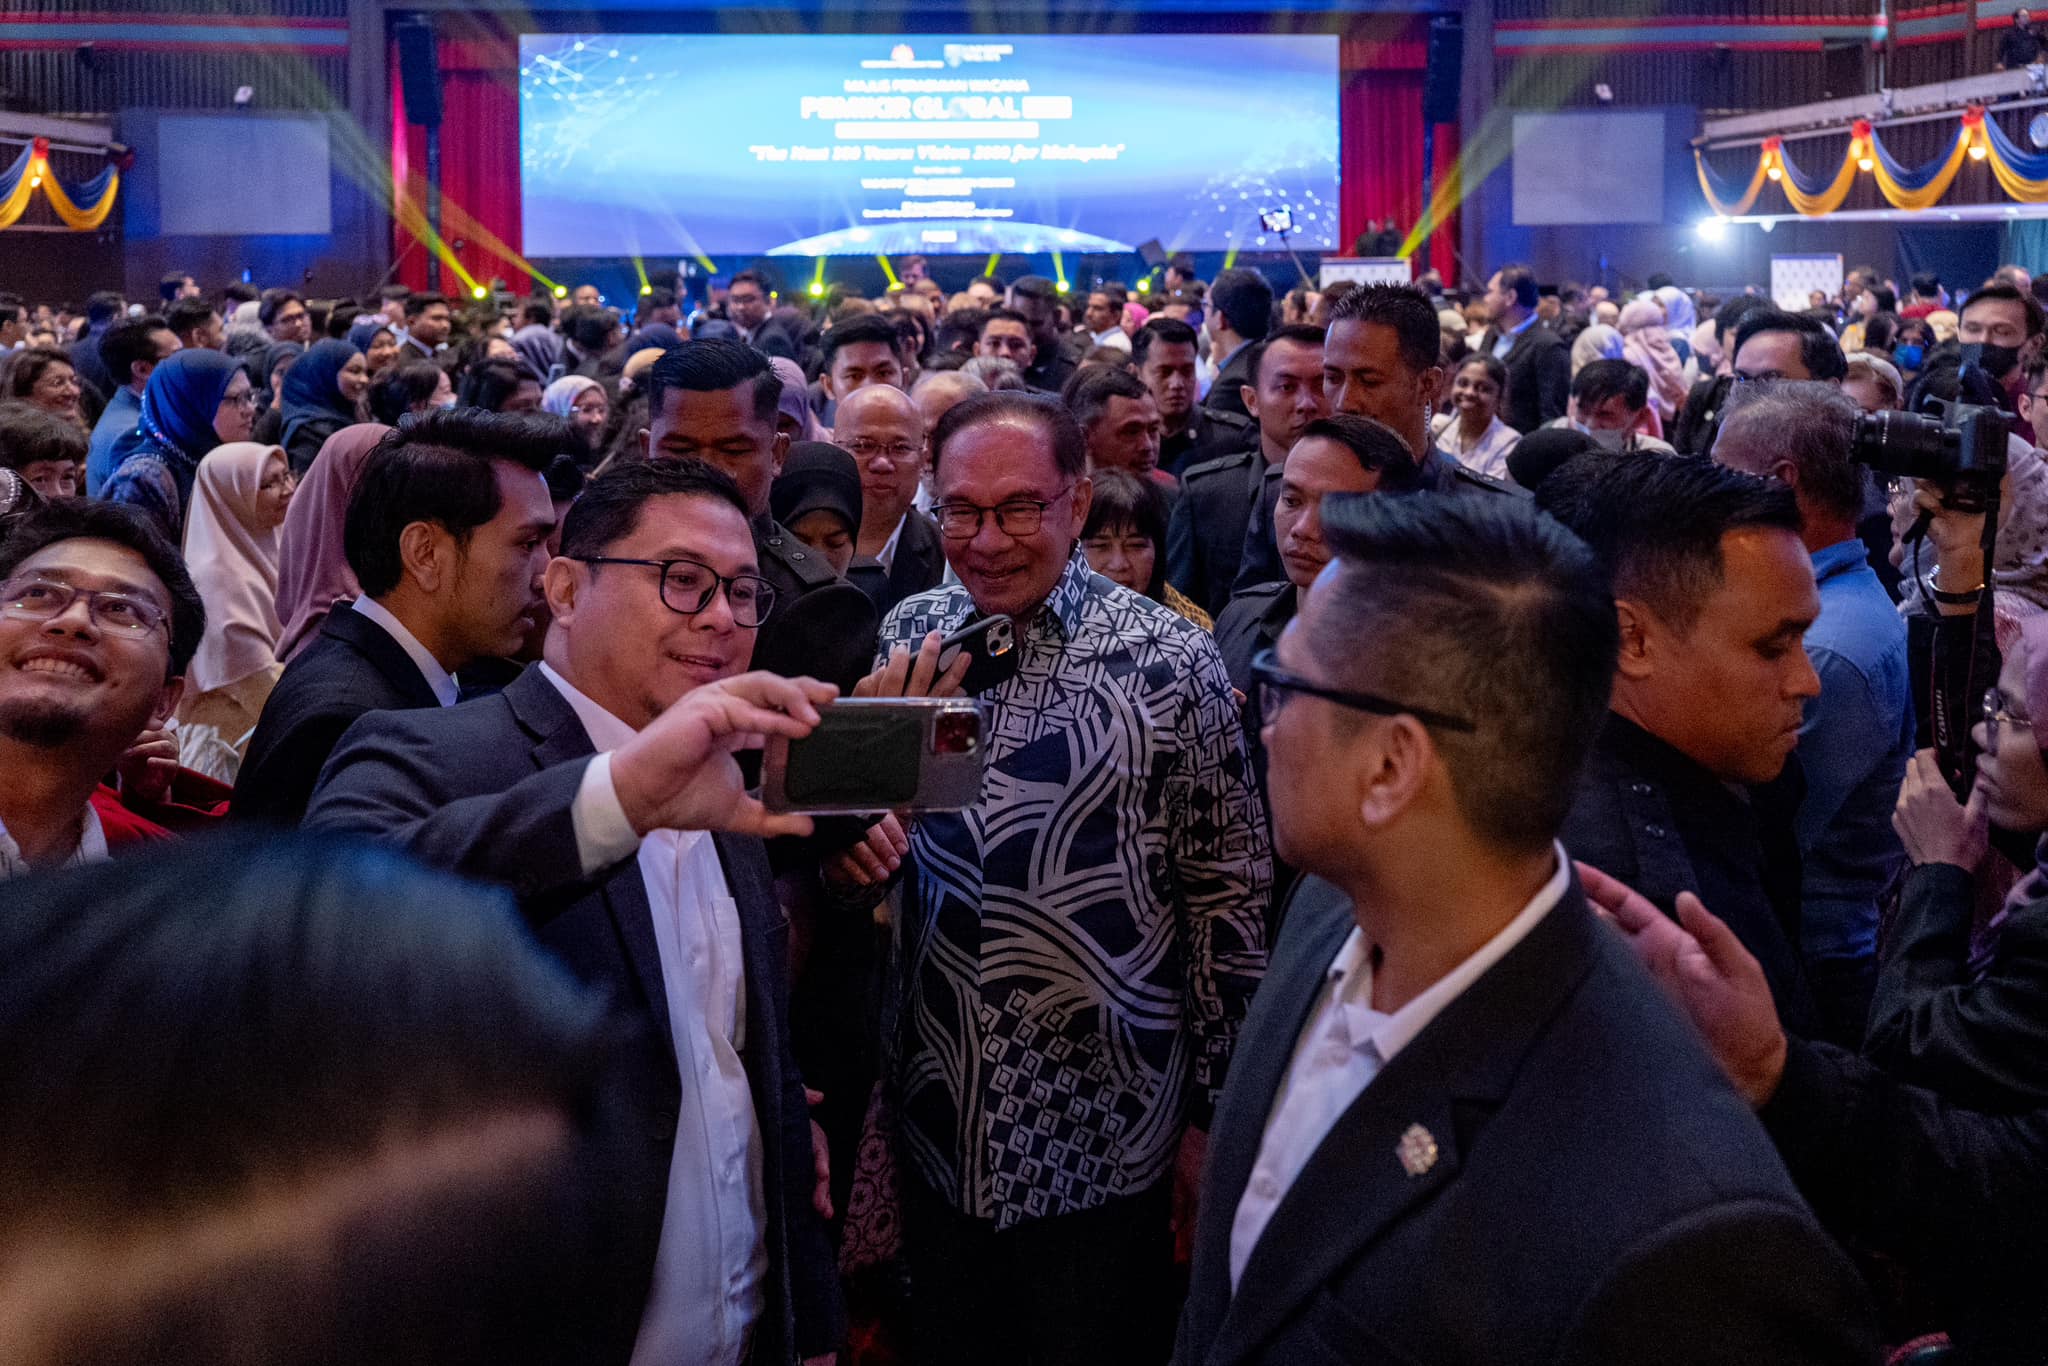 New Sarawak governor will be announced in a day or two: PM